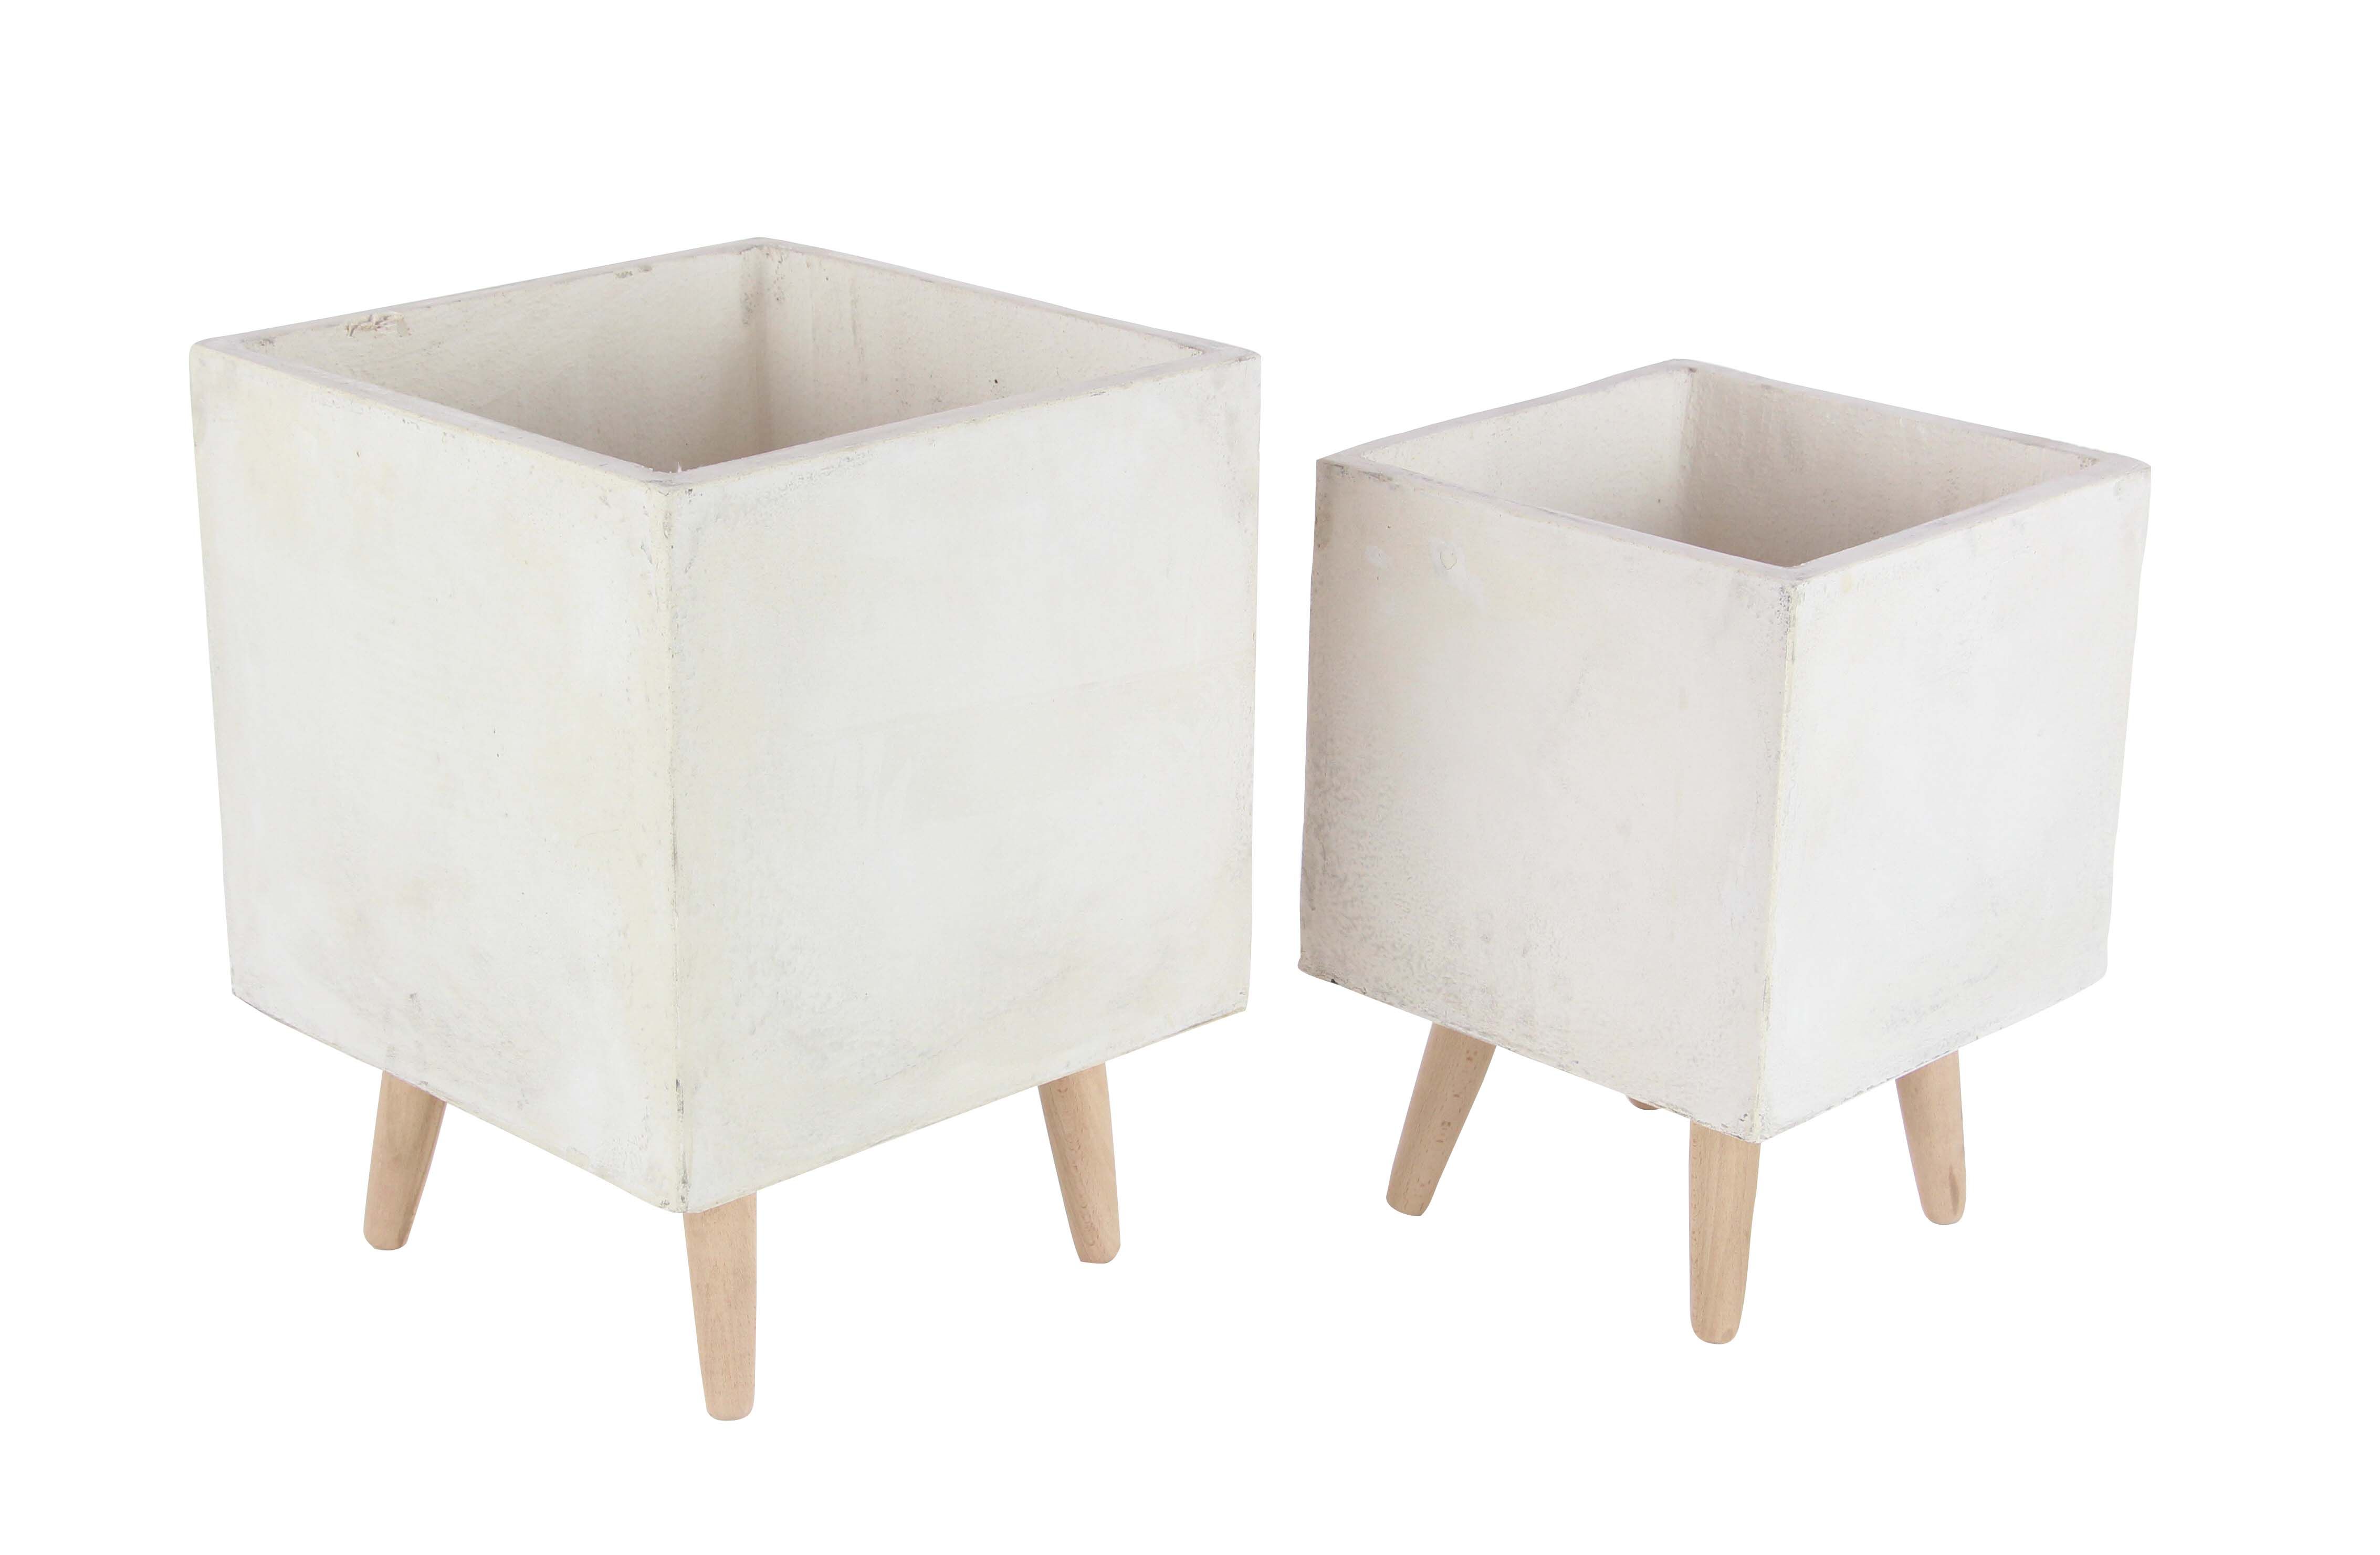 Decmode Contemporary Fiberclay Planters with Wooden Stand, White, Set of 2 | Walmart (US)